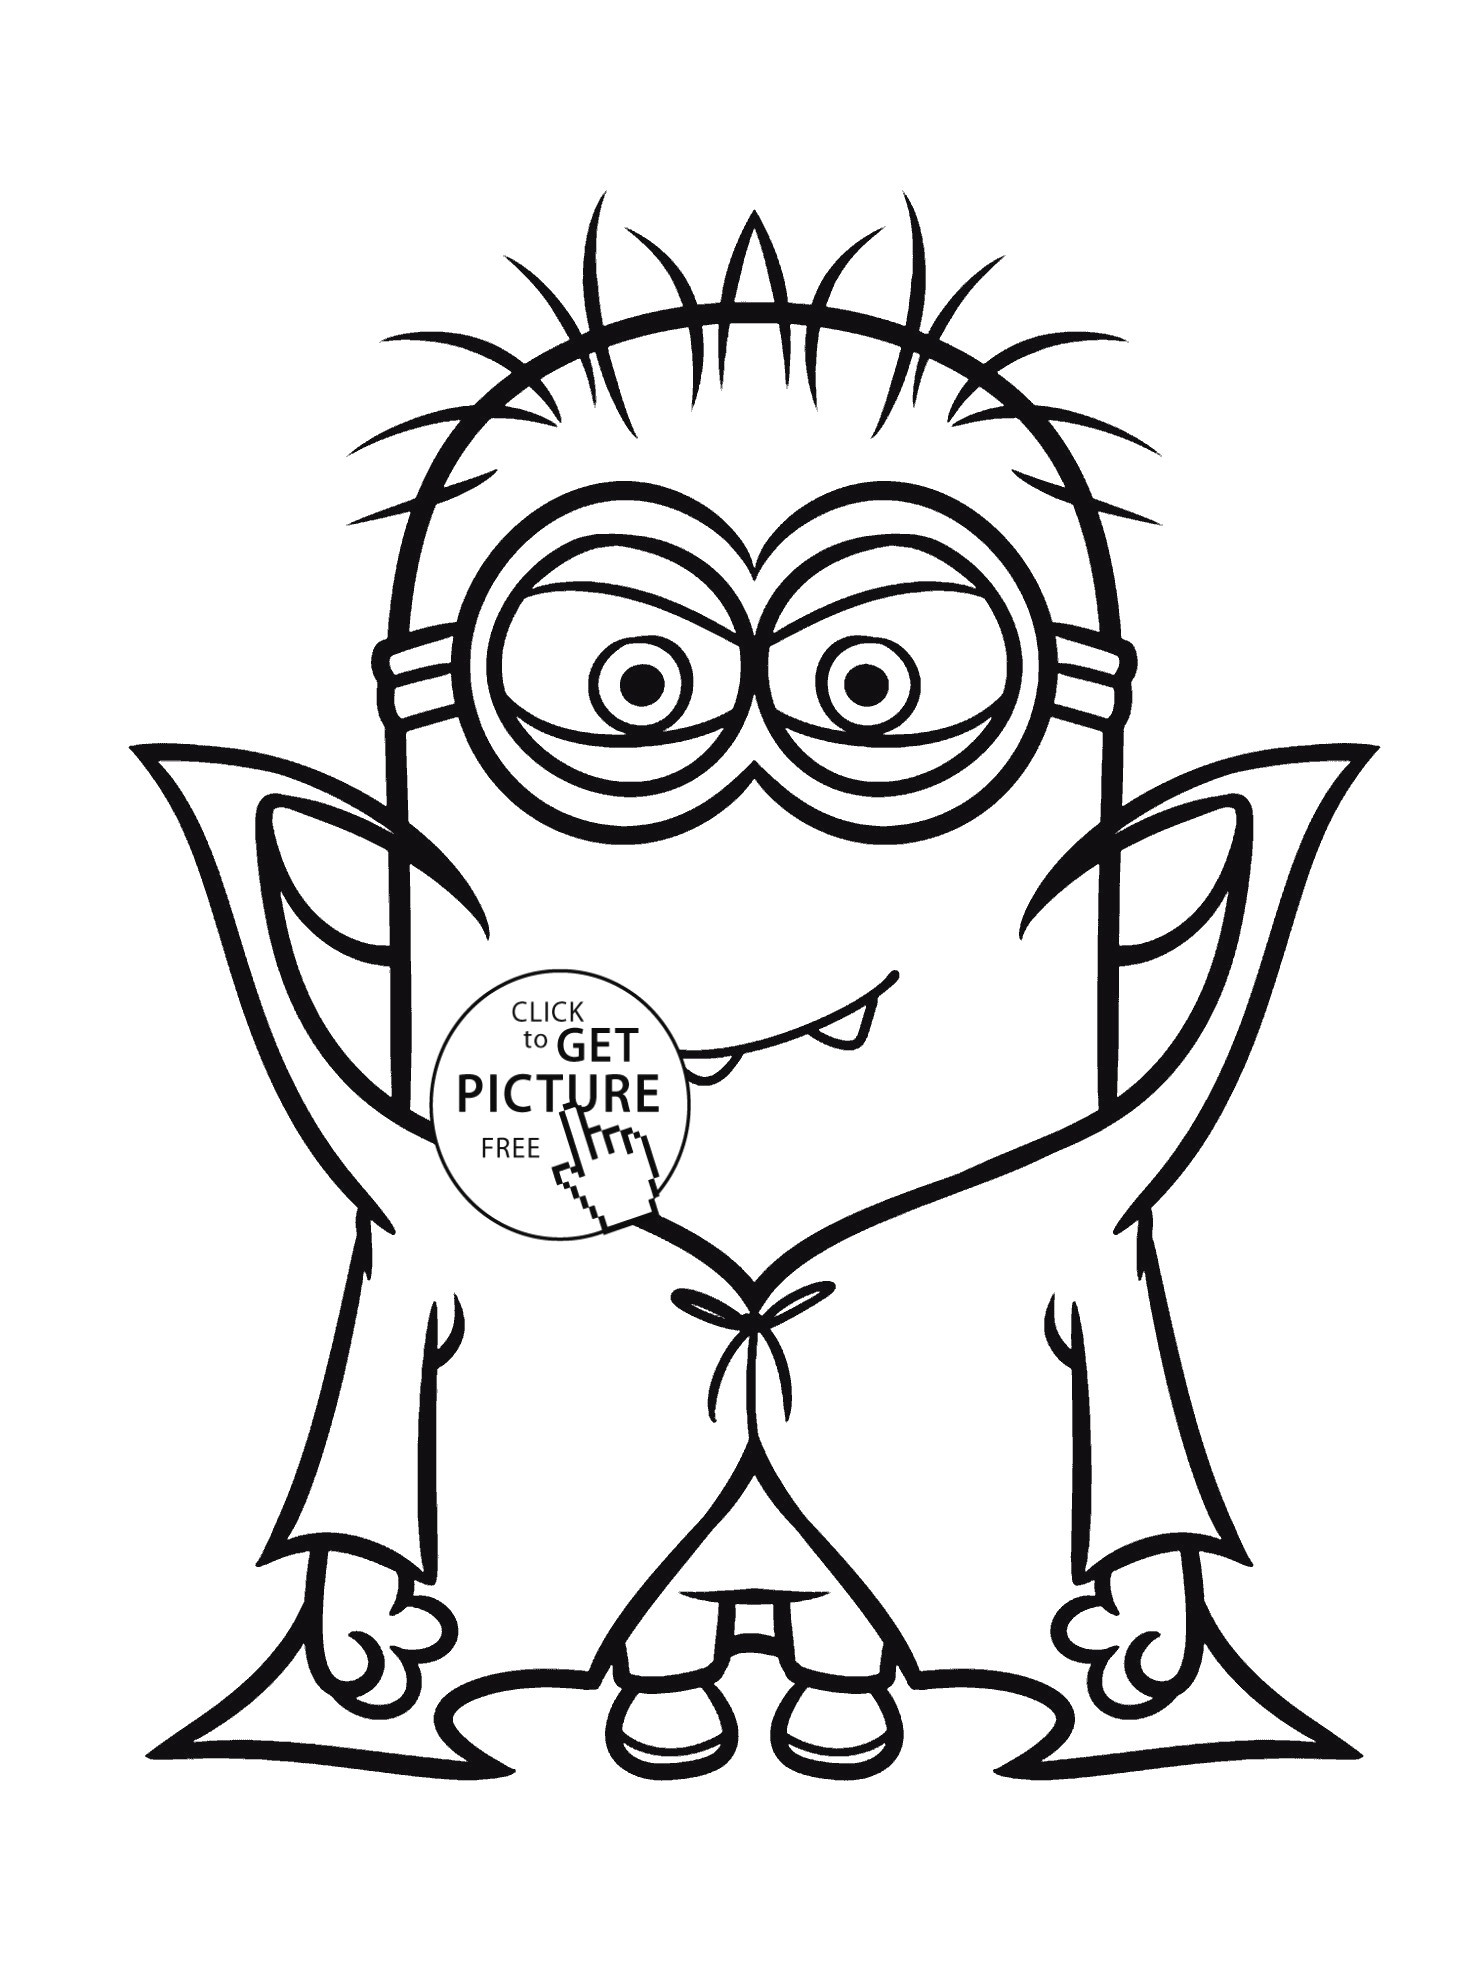 Coloring Pages : Free Halloween Printables For Kids To Color Puzzles - Free Halloween Printables